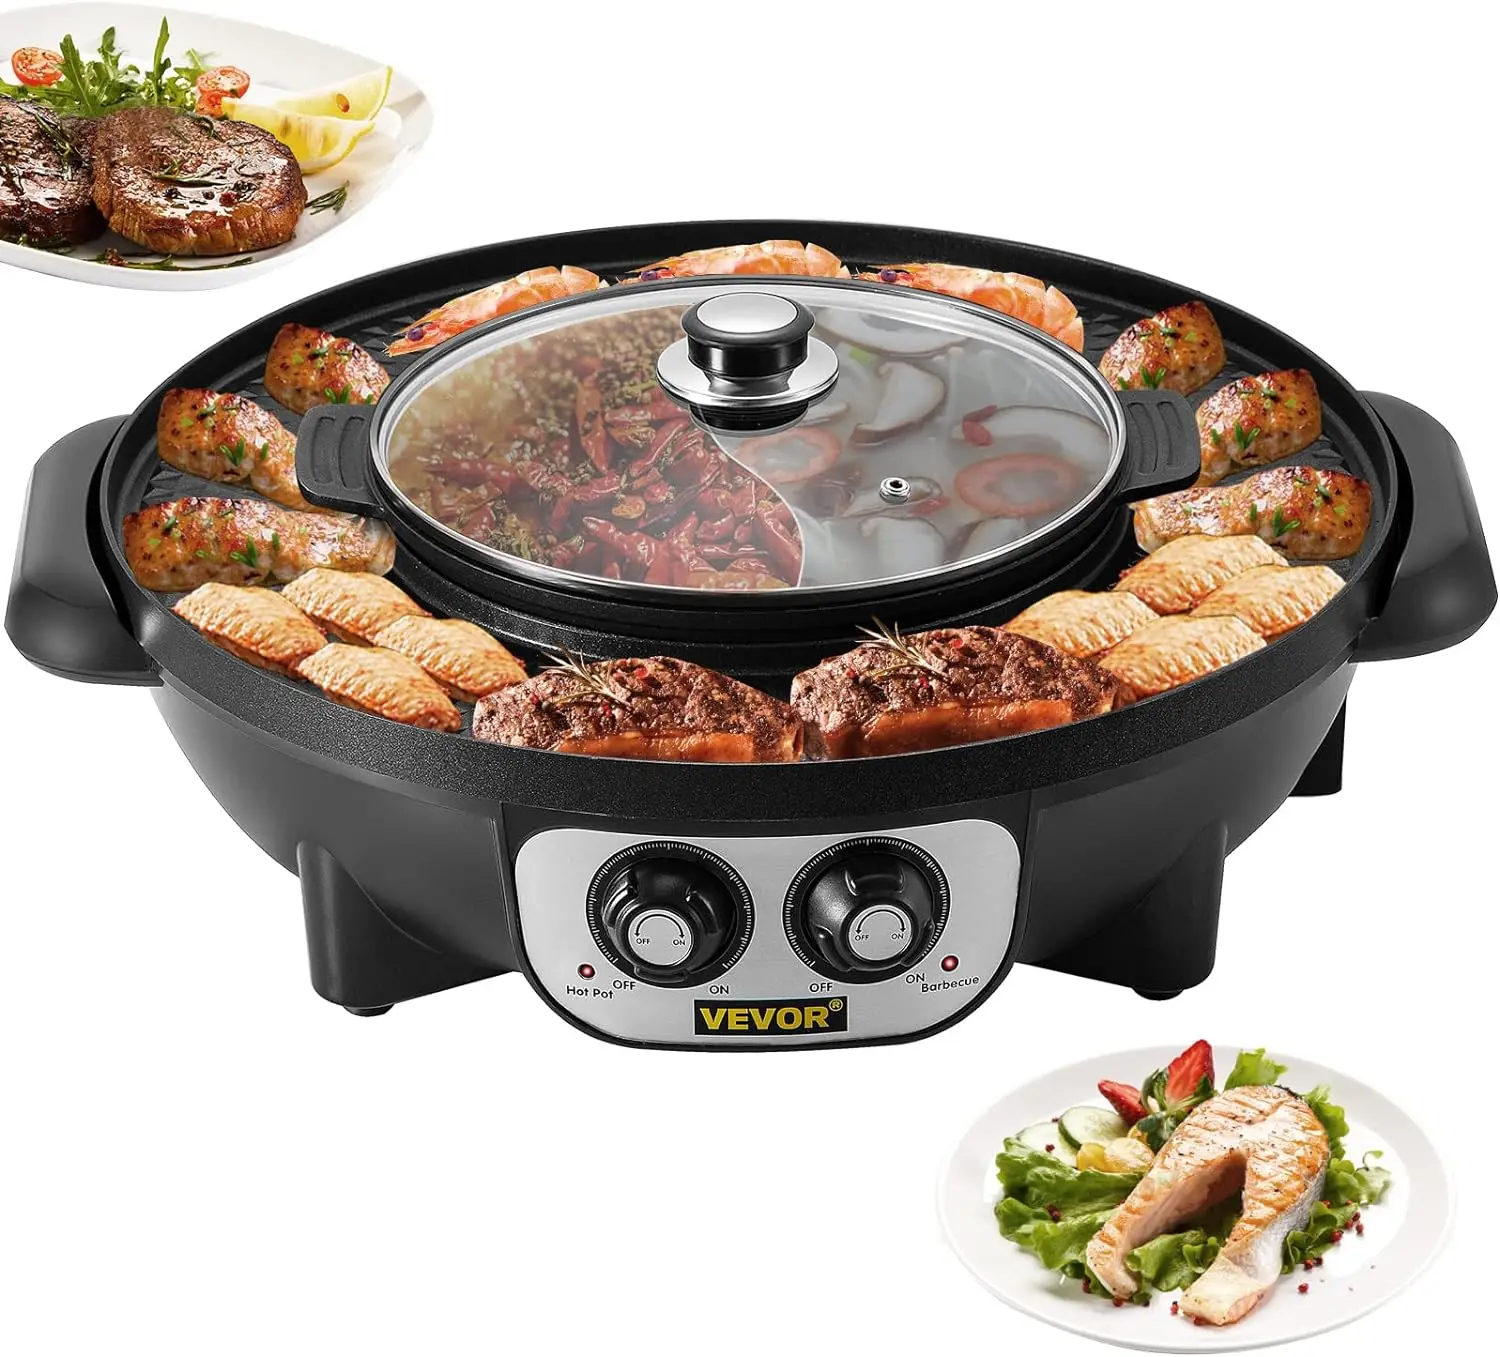 

in 1 Grill and Hot Pot, 2200W BBQ Pan Grill and Hot Pot, Multifunctional Teppanyaki Grill Pot with Dual Temp Control, Smokeless